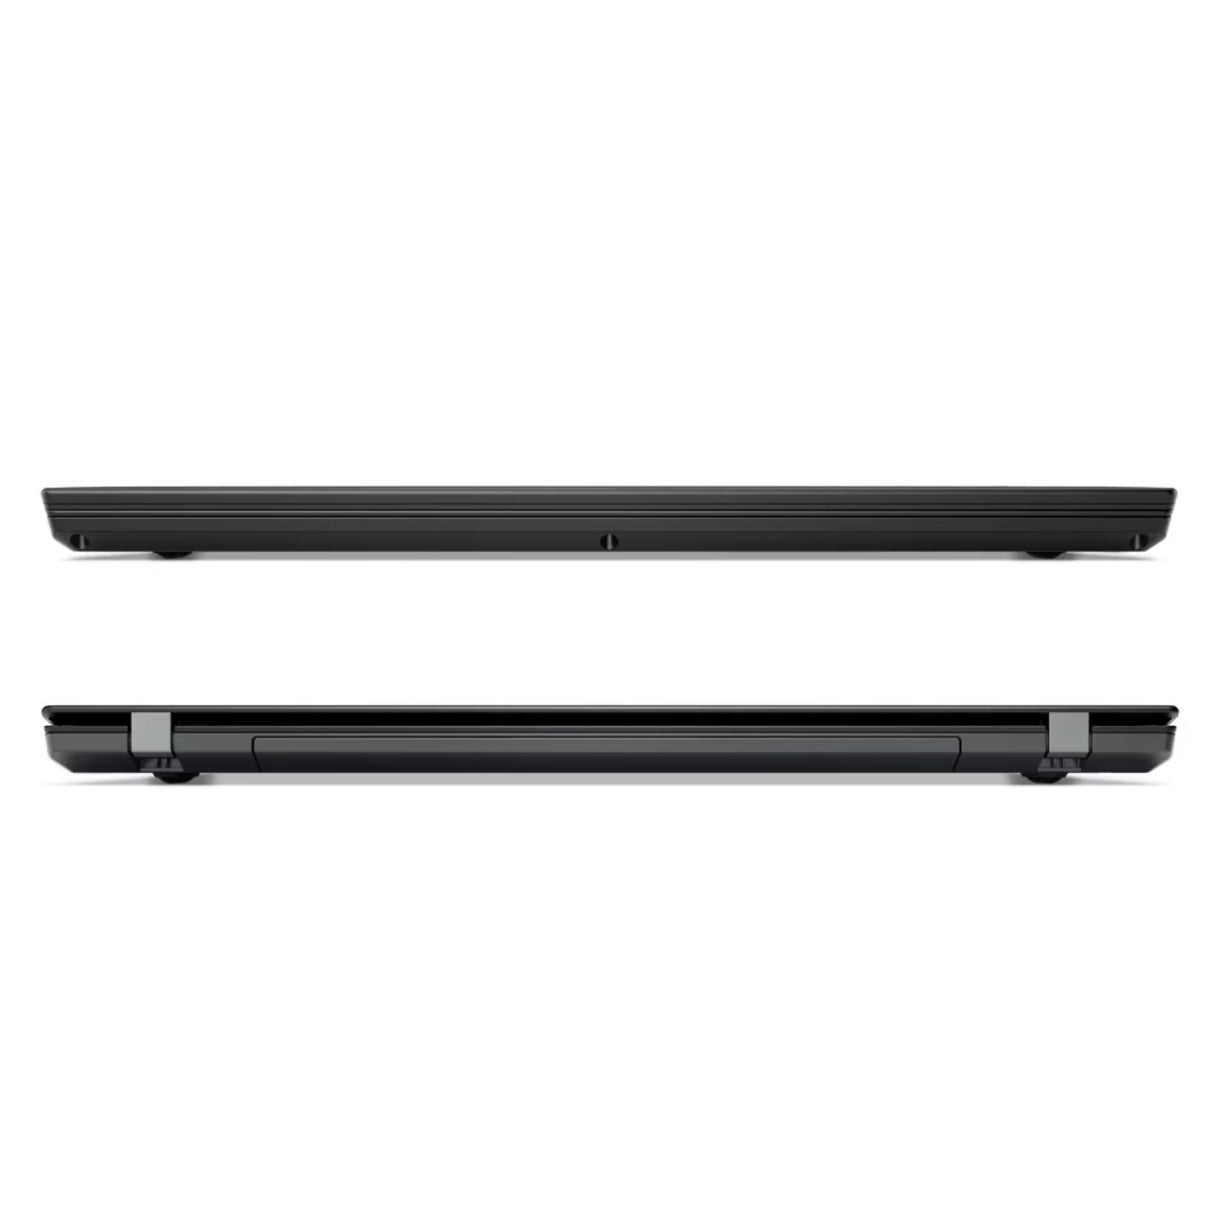 Lenovo ThinkPad T470 i5 6th gen 14 inches FHD Display laptop Windows 10 With Ms Office 2016(Renewed)